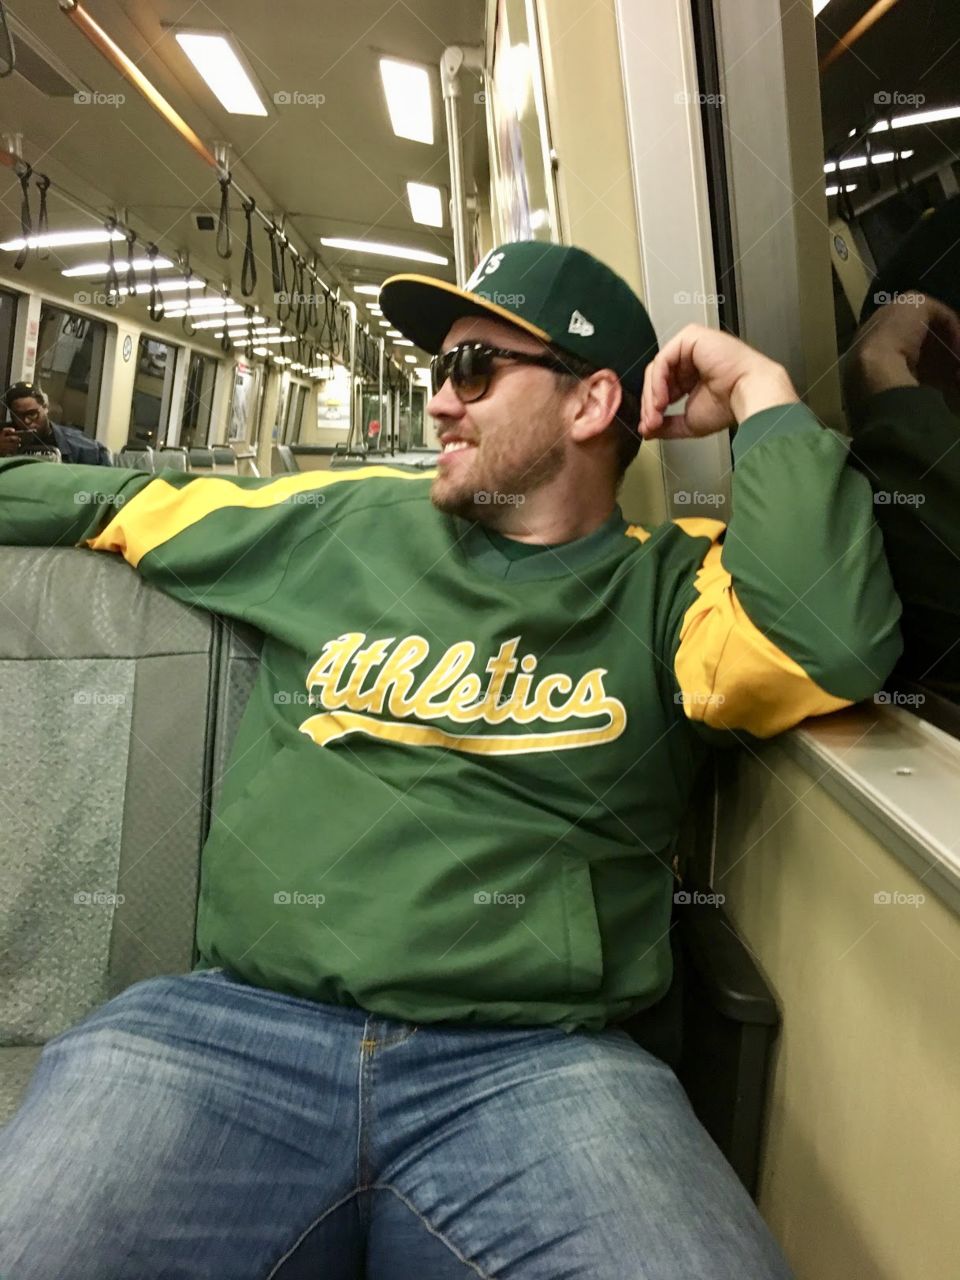 BART and you’re there to root on the Oakland A’s 